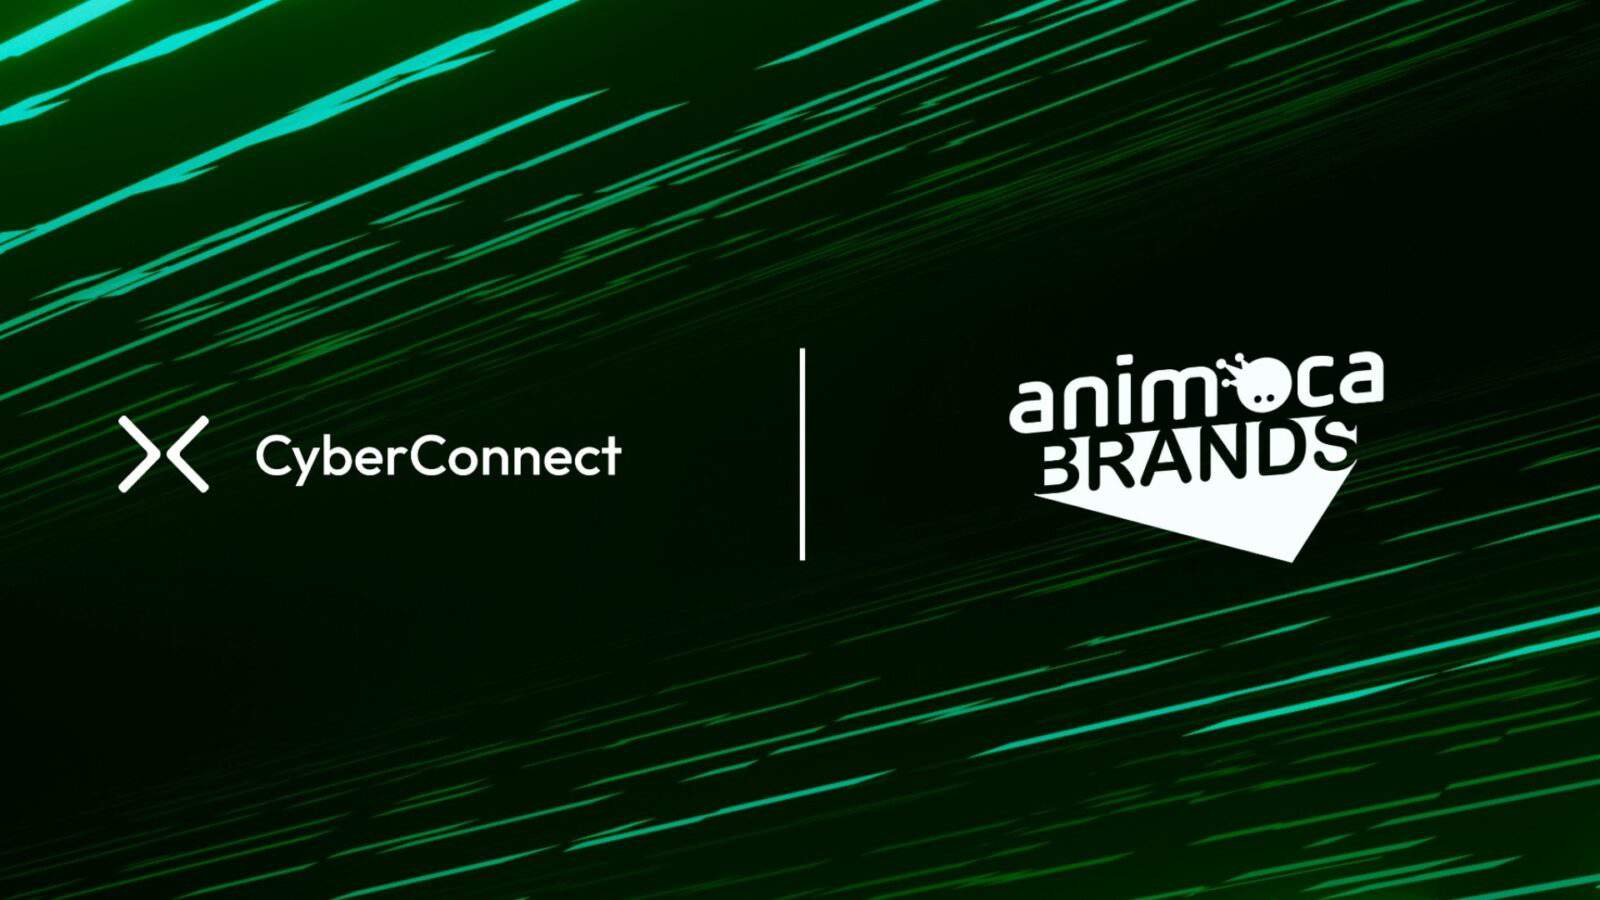 Animoca Brands and CyberConnect to Build a Decentralized Social Layer for Mocaverse